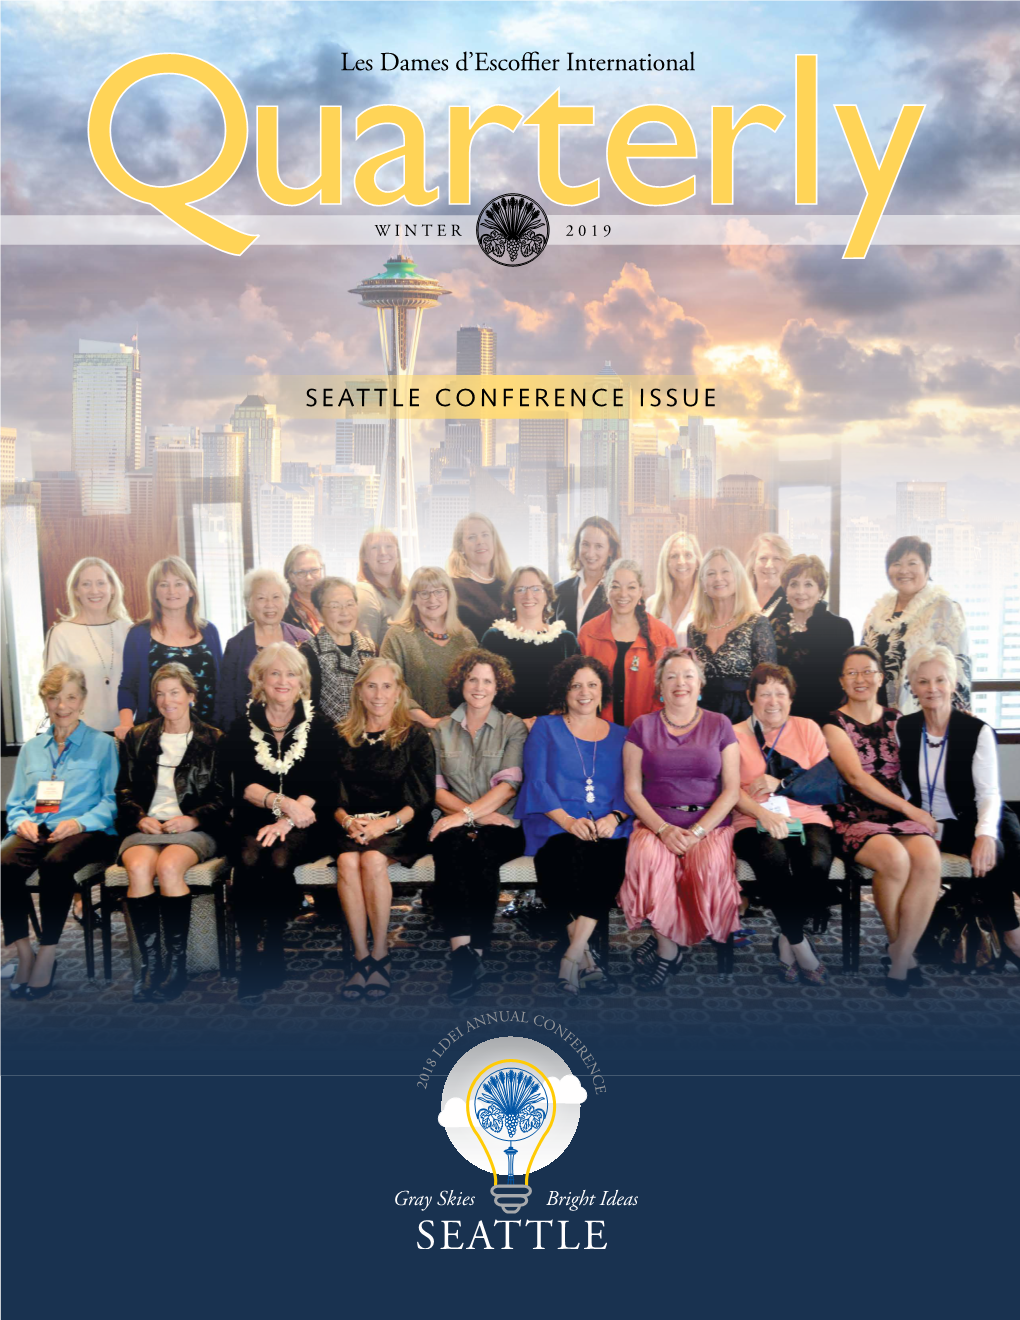 SEATTLE CONFERENCE ISSUE on the Cover: Seattle Chapter